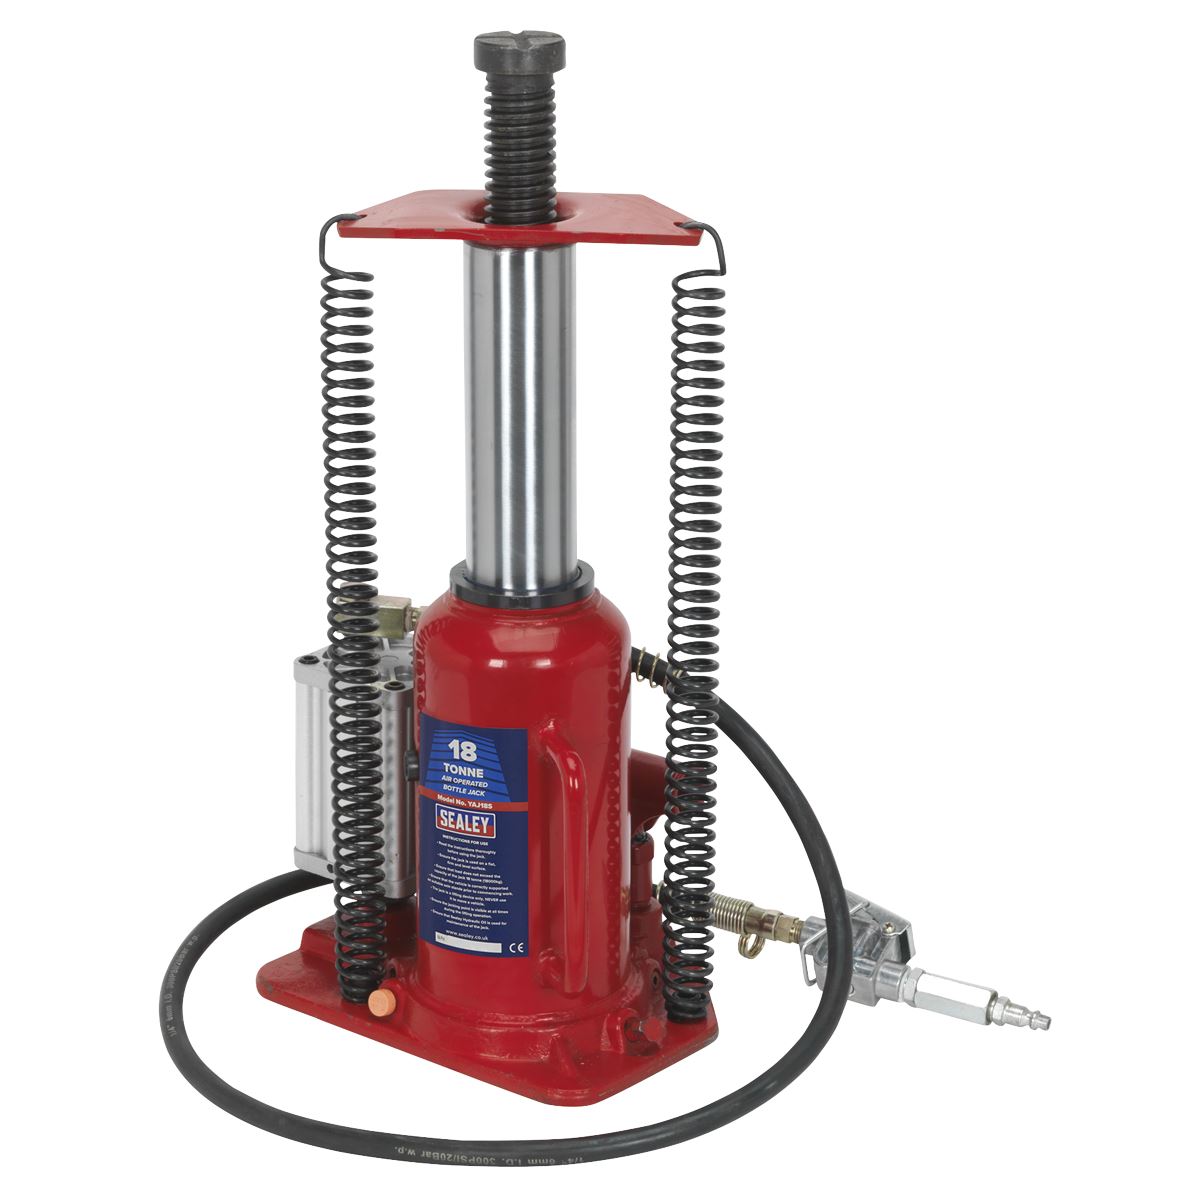 Sealey Air Operated Bottle Jack 18 Tonne